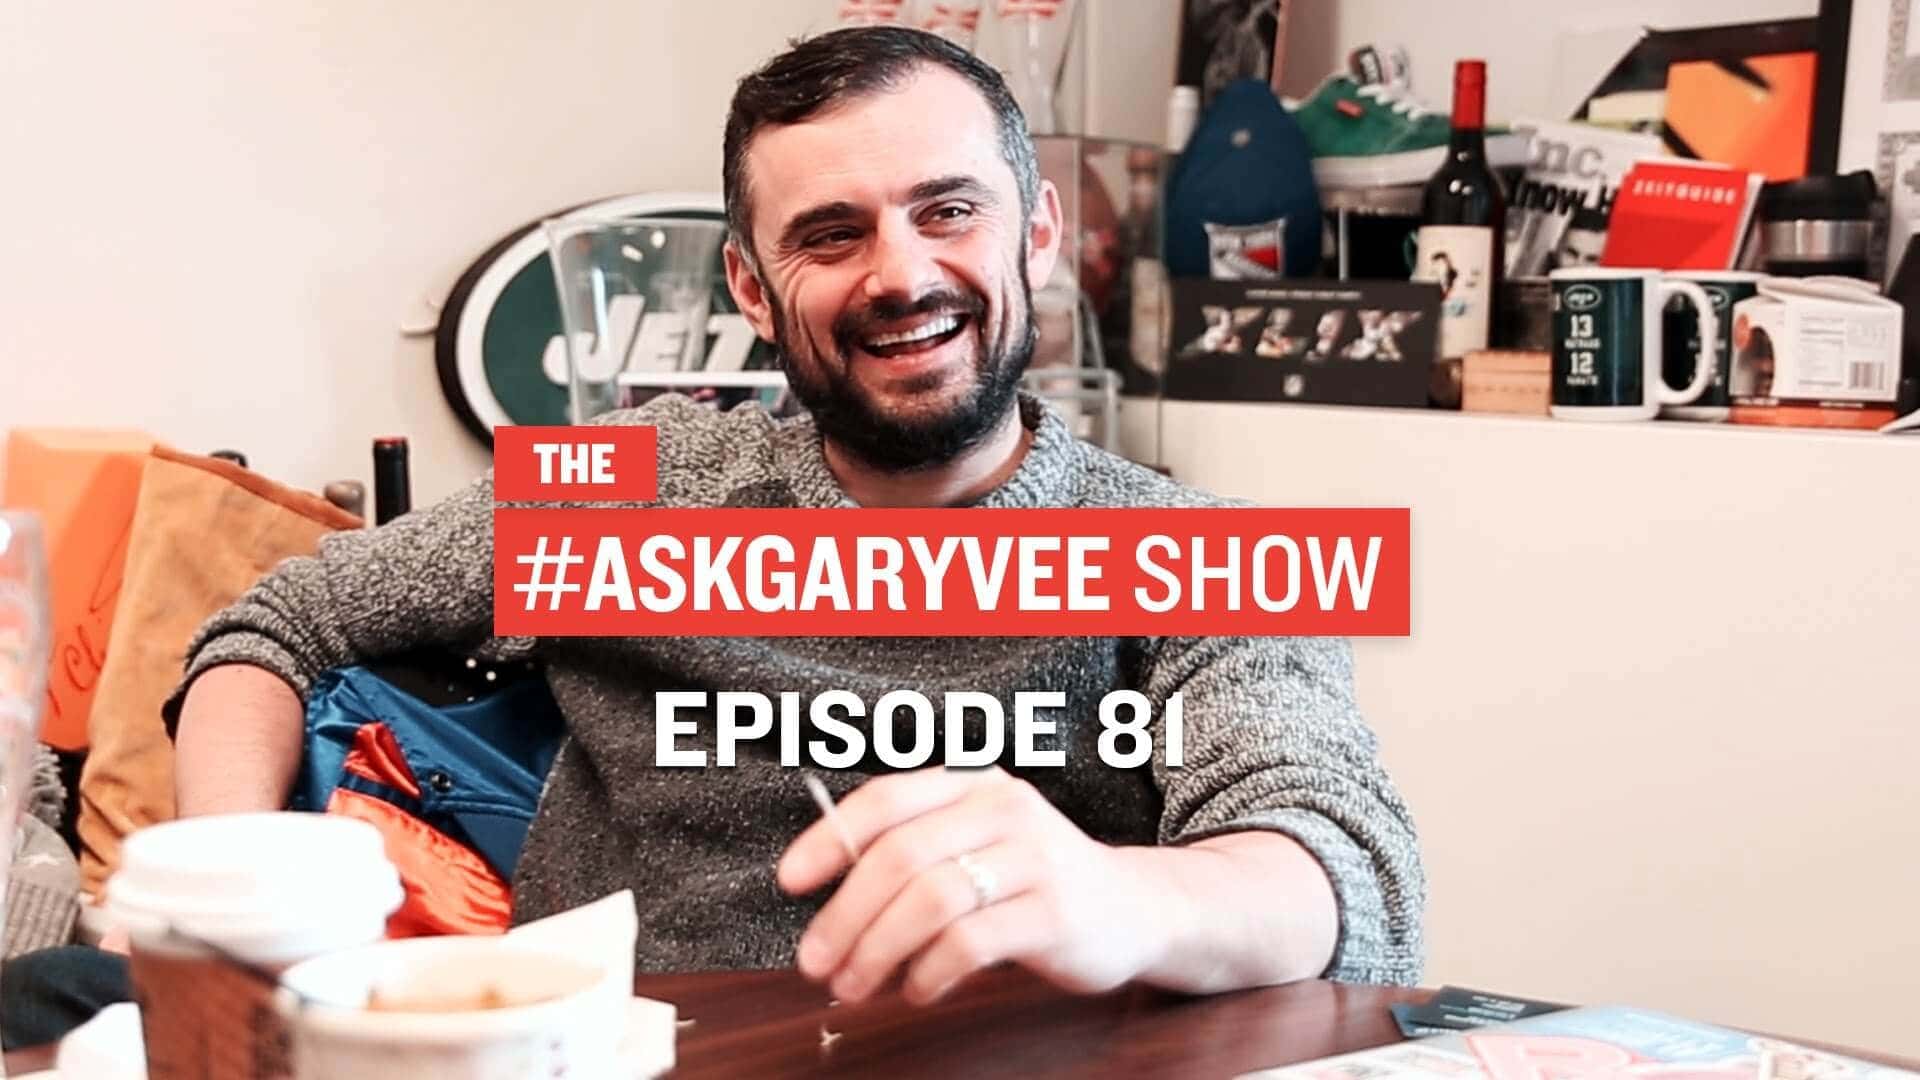 #AskGaryVee Episode 81: Food Poisoning, Subscription Services & Youtube vs. Facebook Video